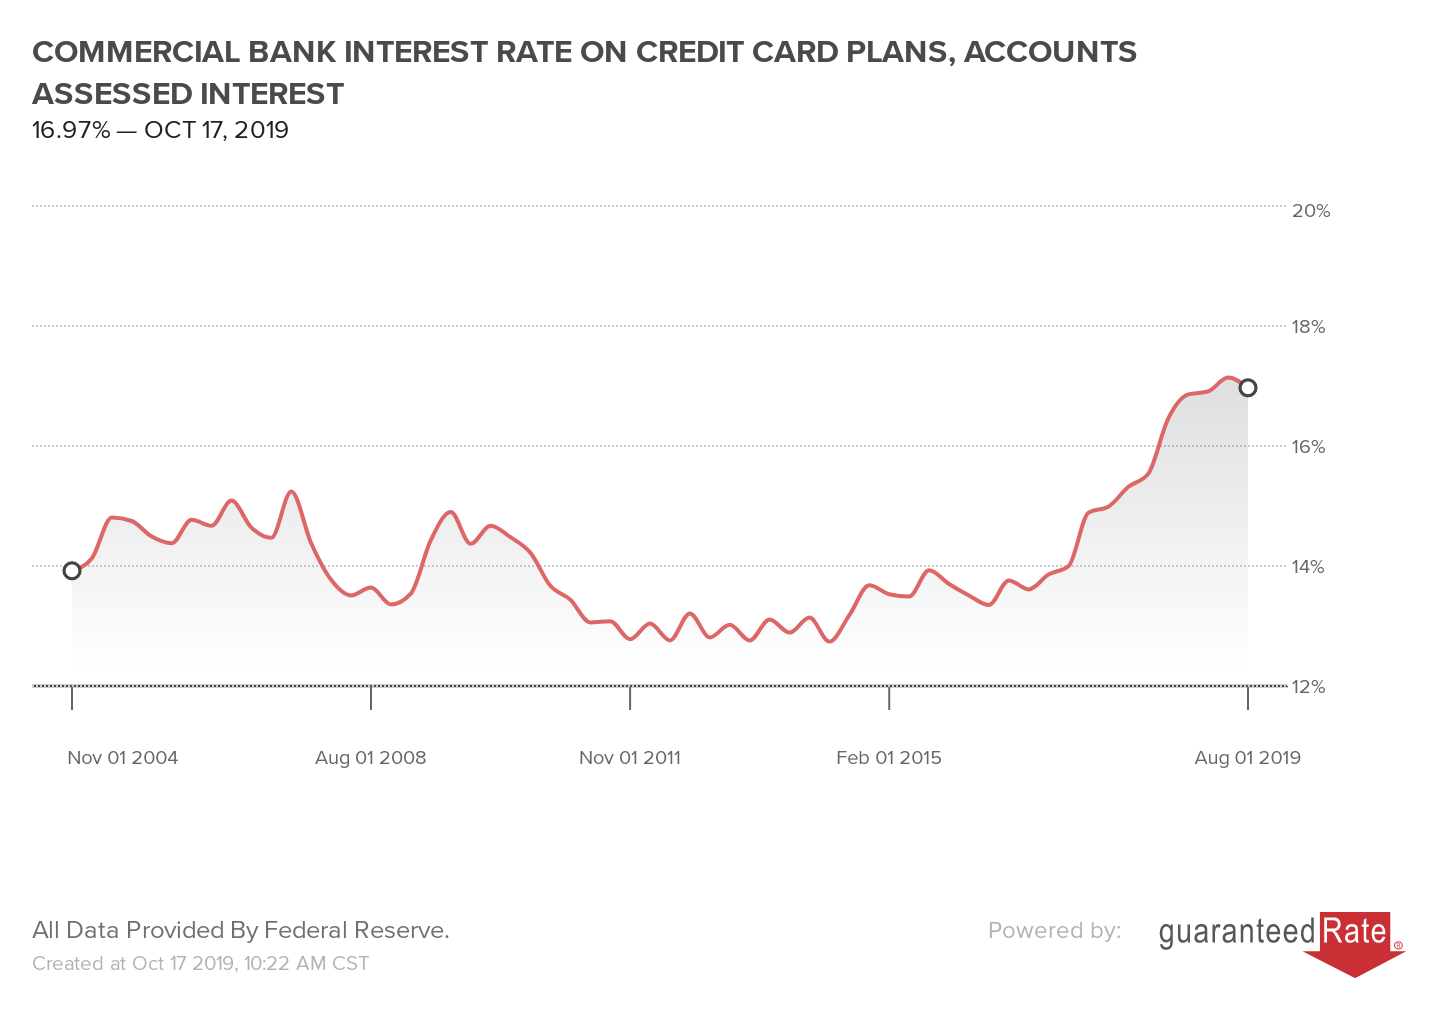 COMMERCIAL BANK INTEREST RATE ON CREDIT CARD PLANS, ACCOUNTS ASSESSED INTEREST